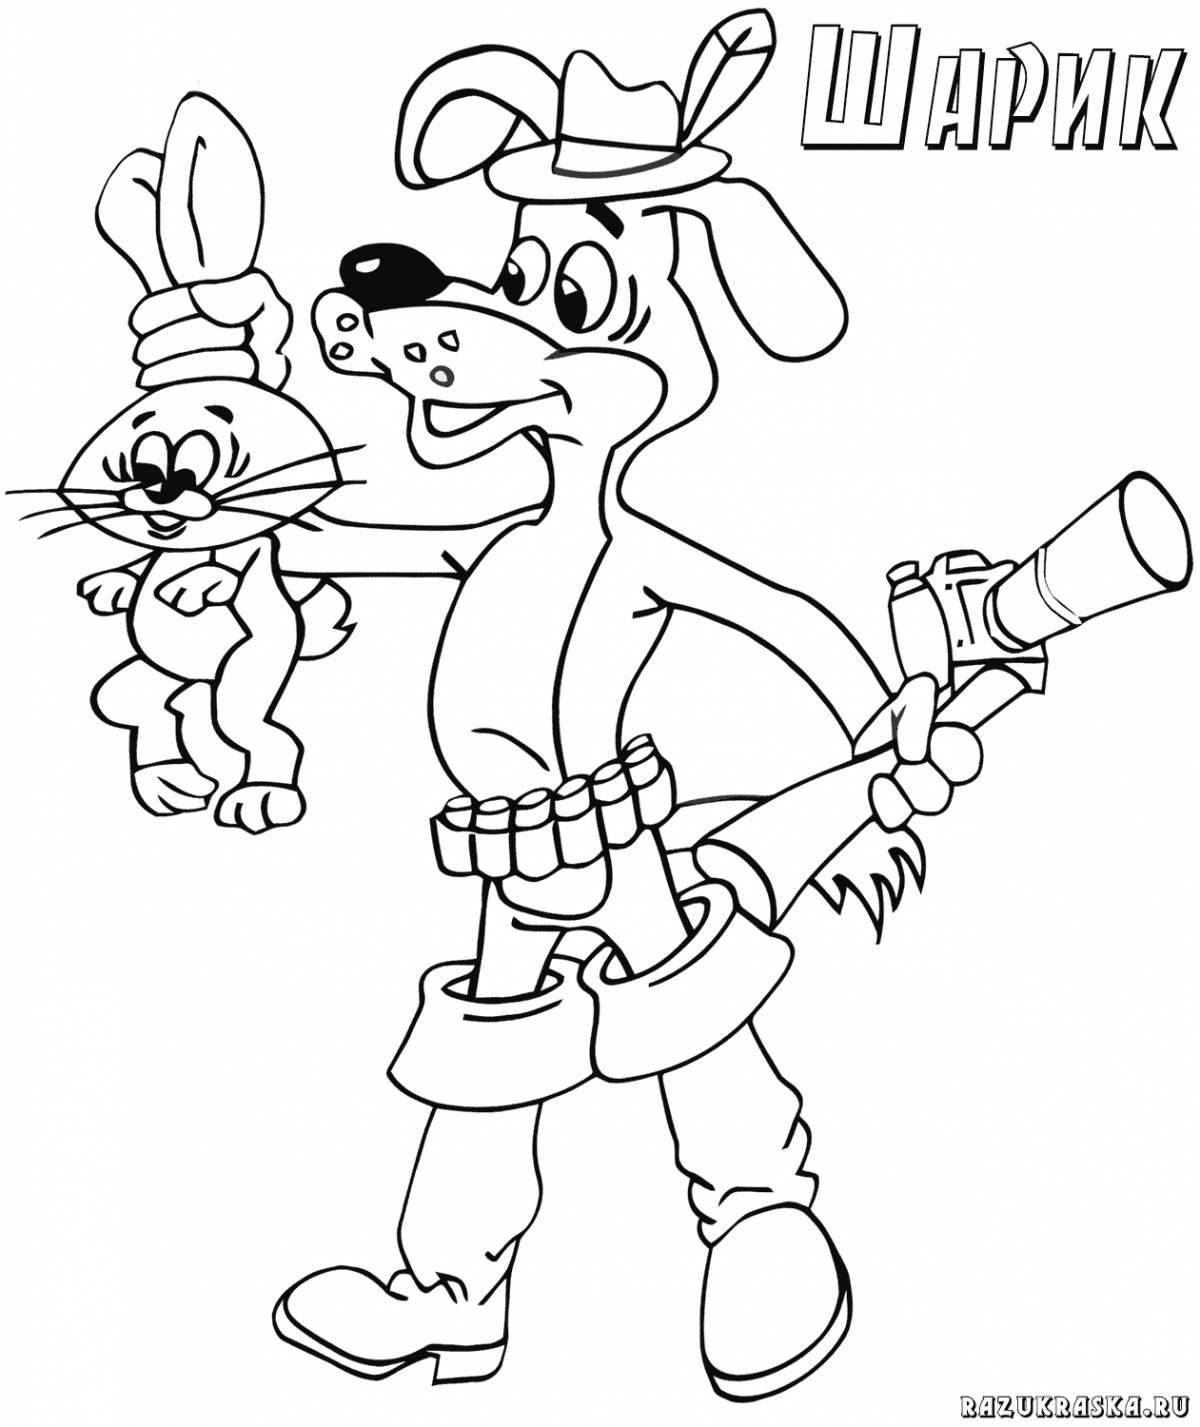 Coloring pages Buttermilk coloring games